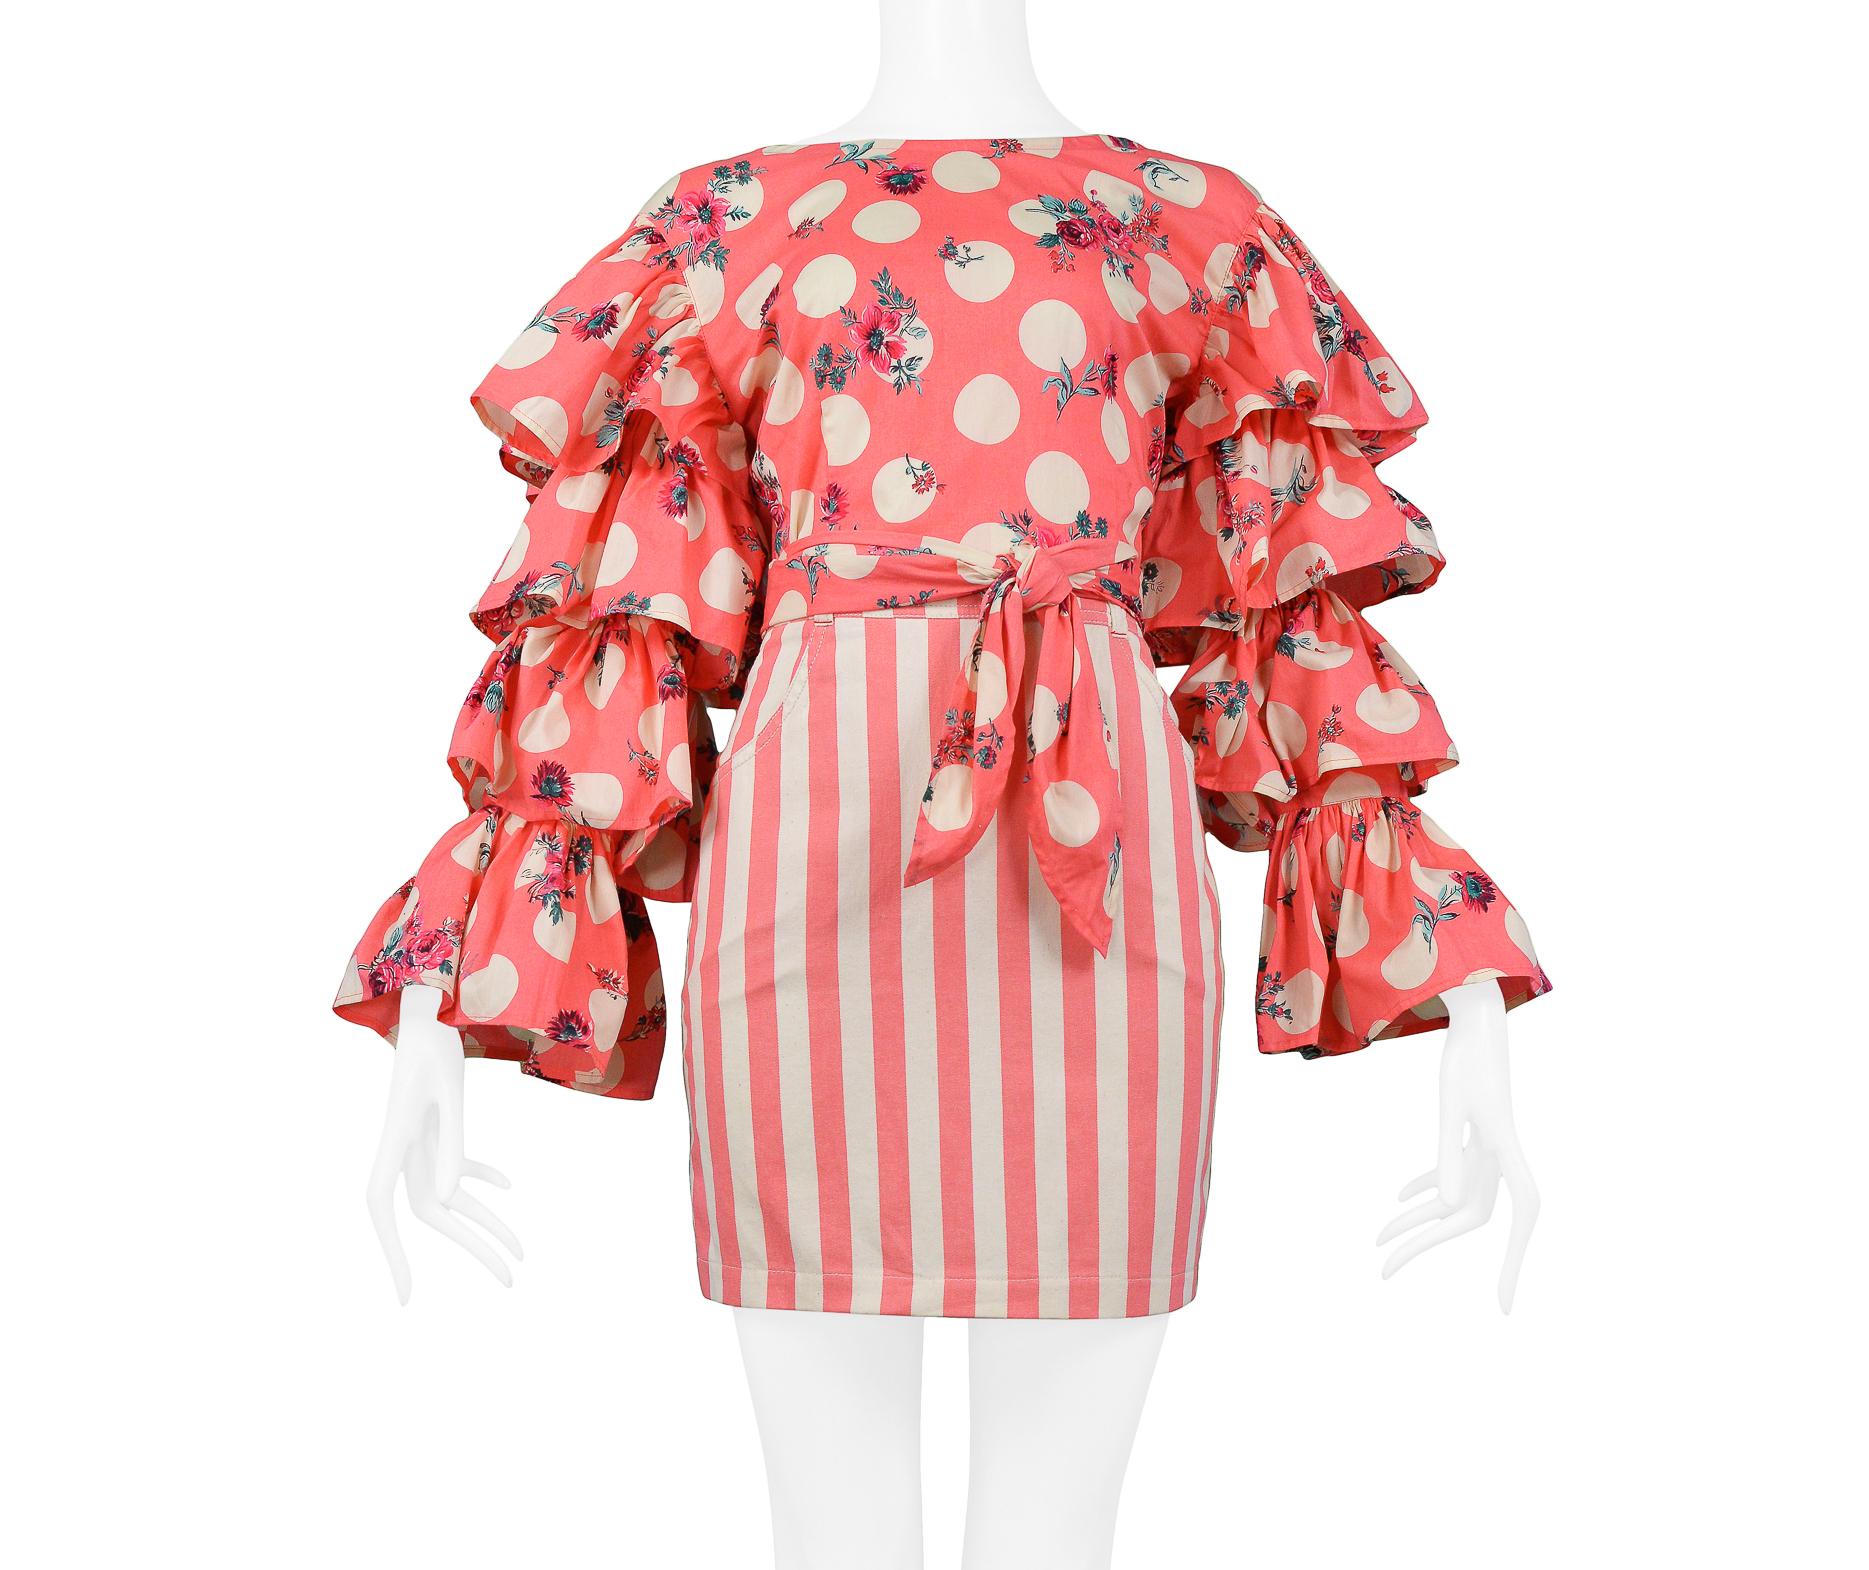 Byblos Hot Pink Floral Dot & Stripe Ensemble 1989 In Excellent Condition For Sale In Los Angeles, CA